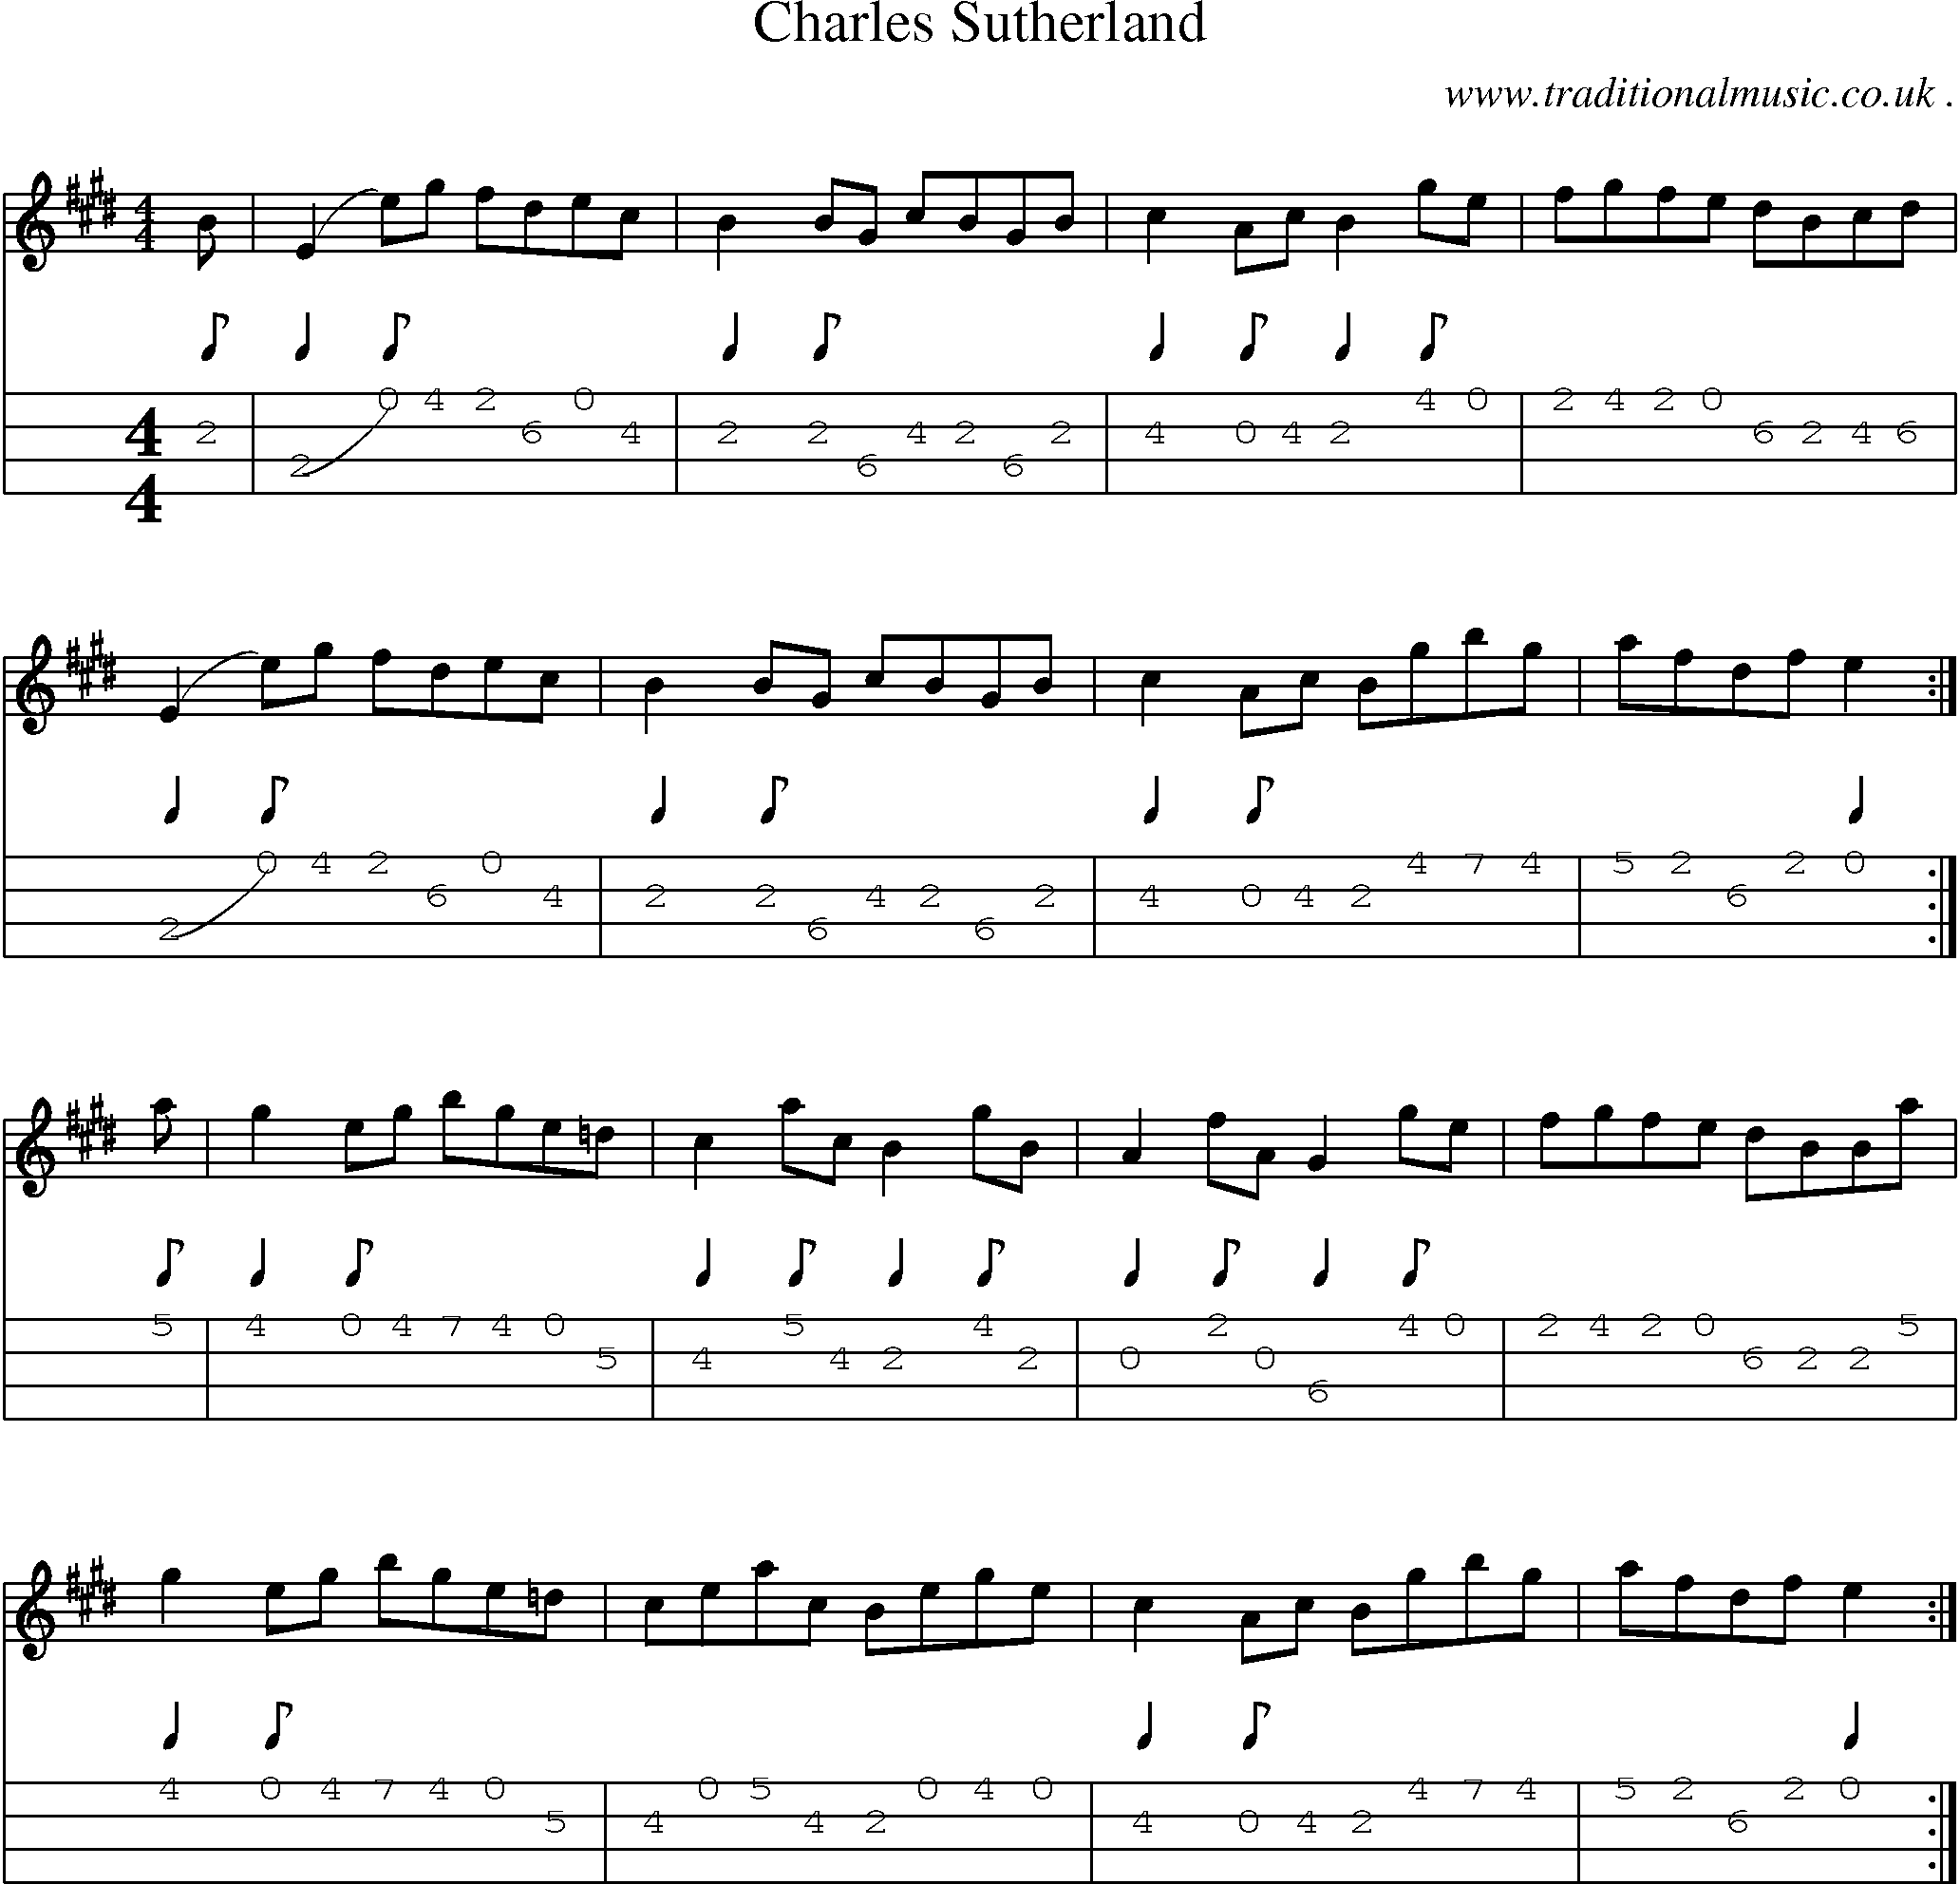 Sheet-music  score, Chords and Mandolin Tabs for Charles Sutherland